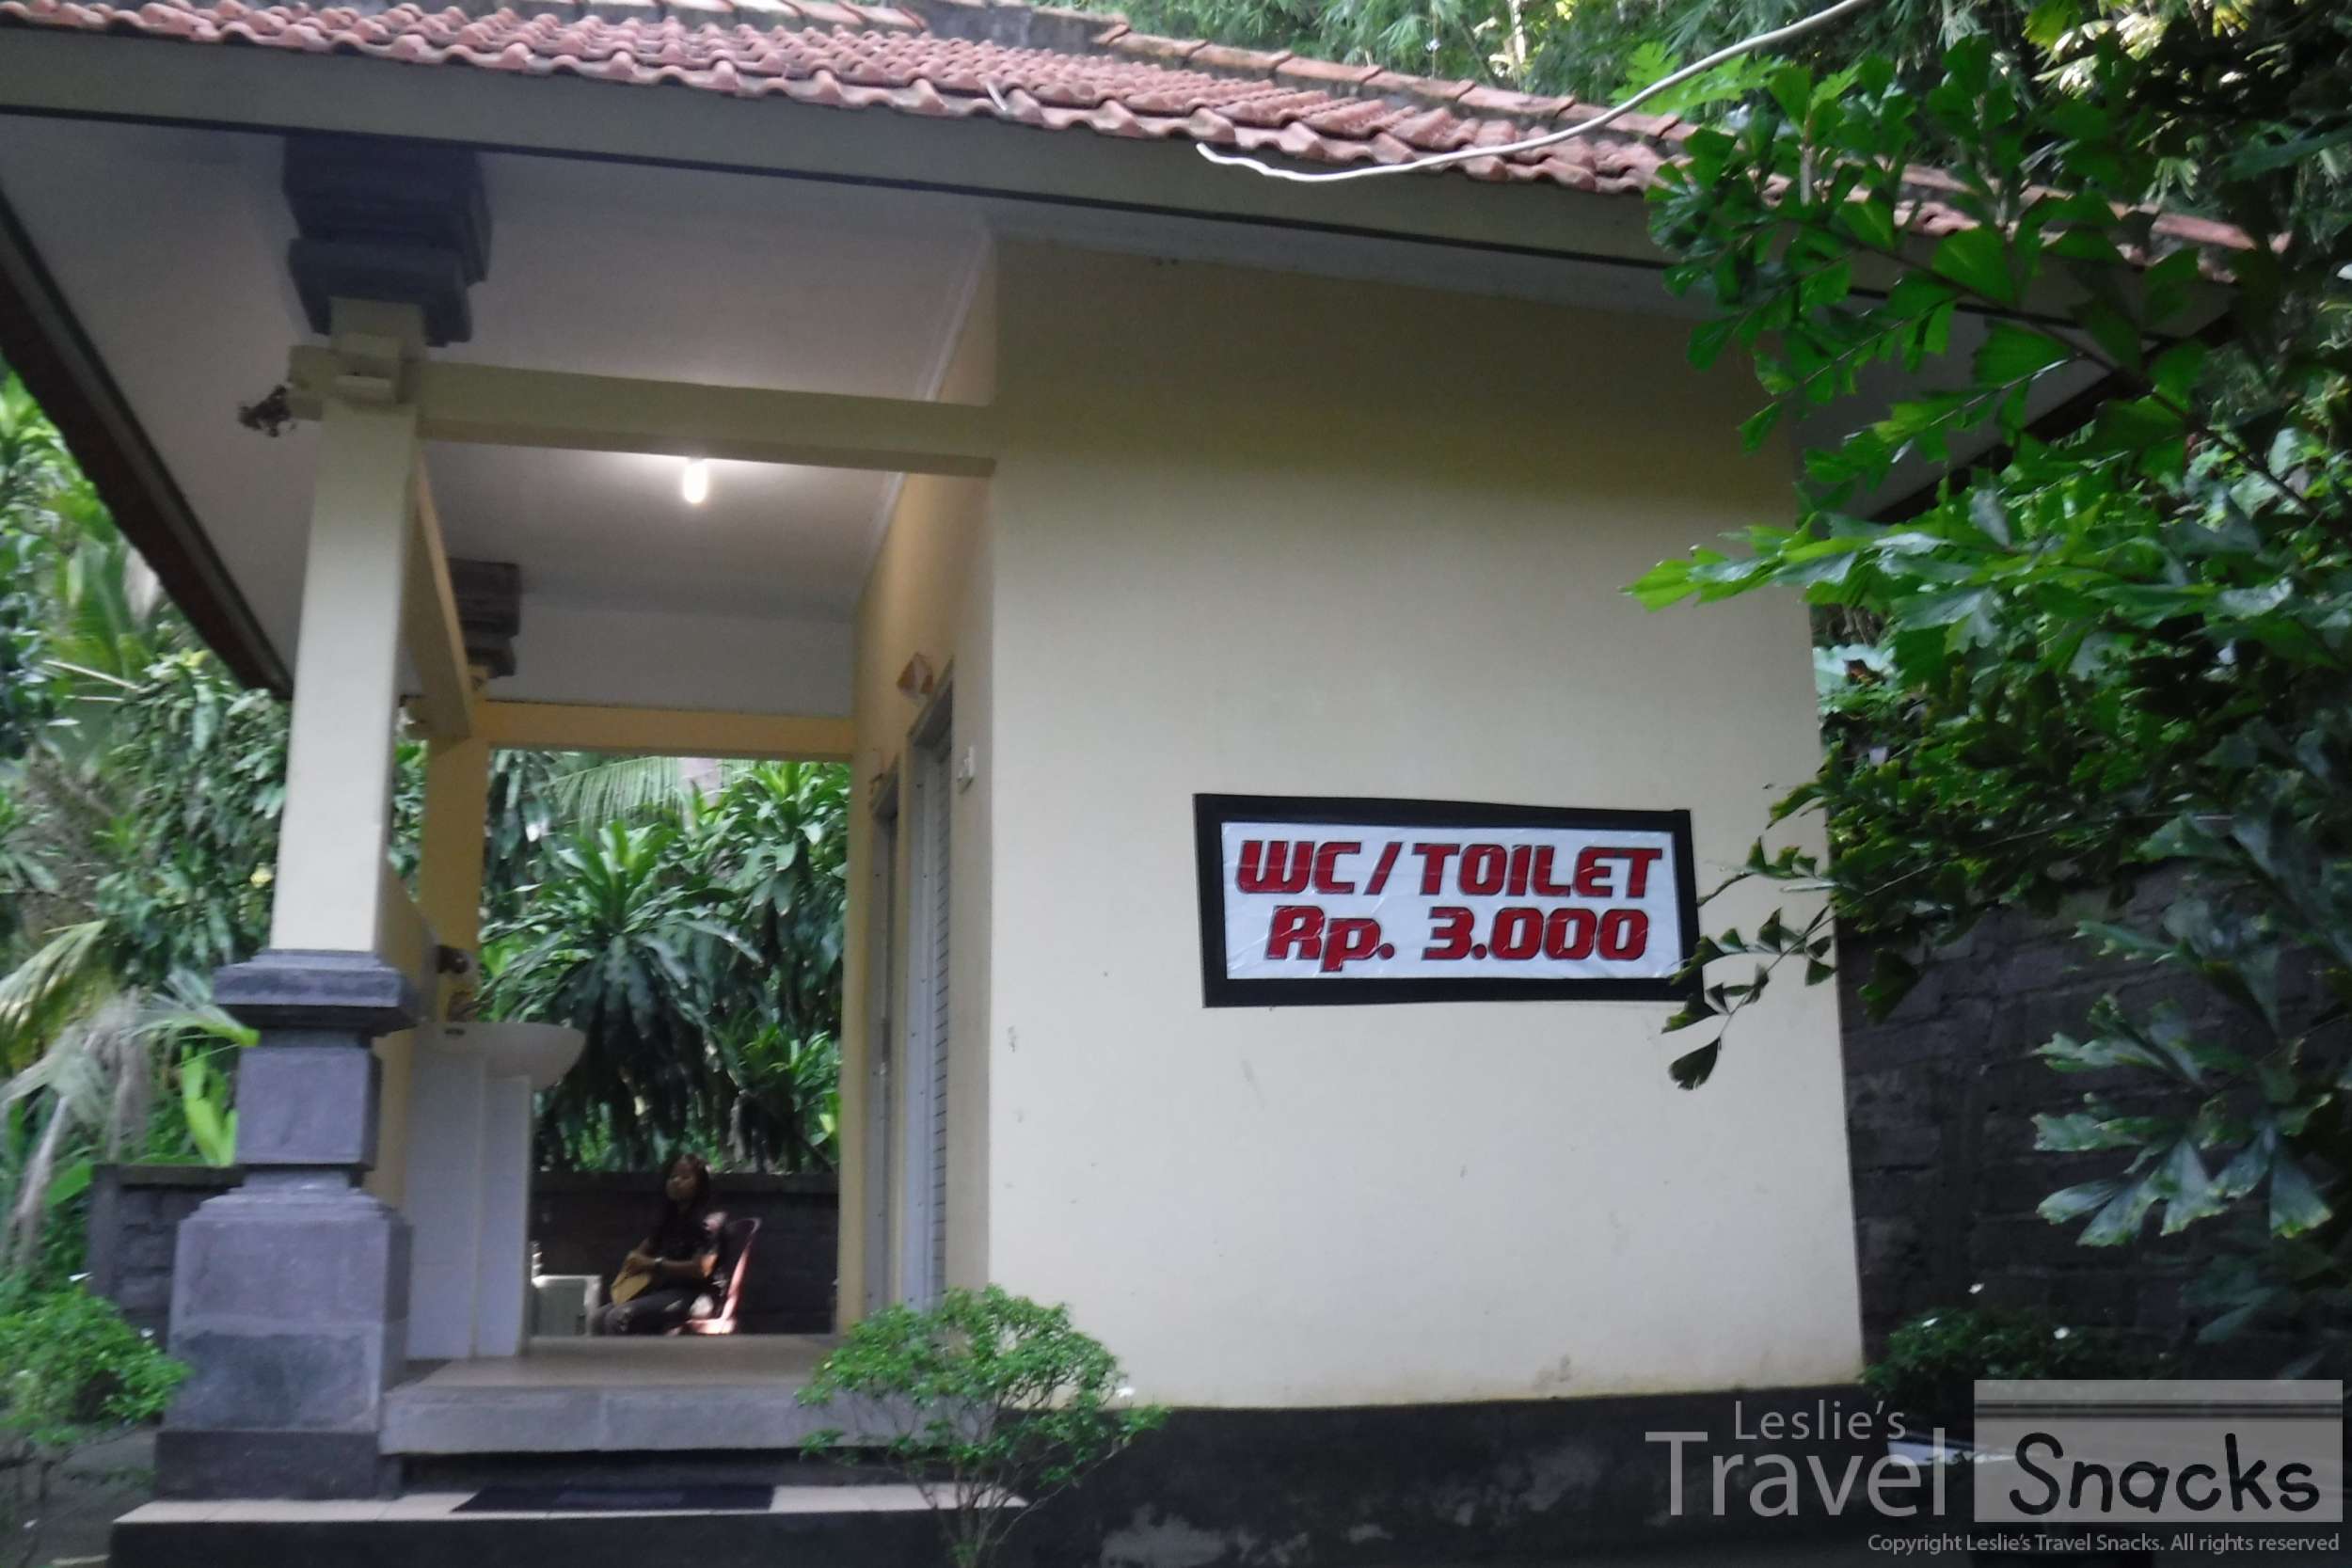 This is about 20 cents to use the toilet at Banjar Hot Springs on Bali.